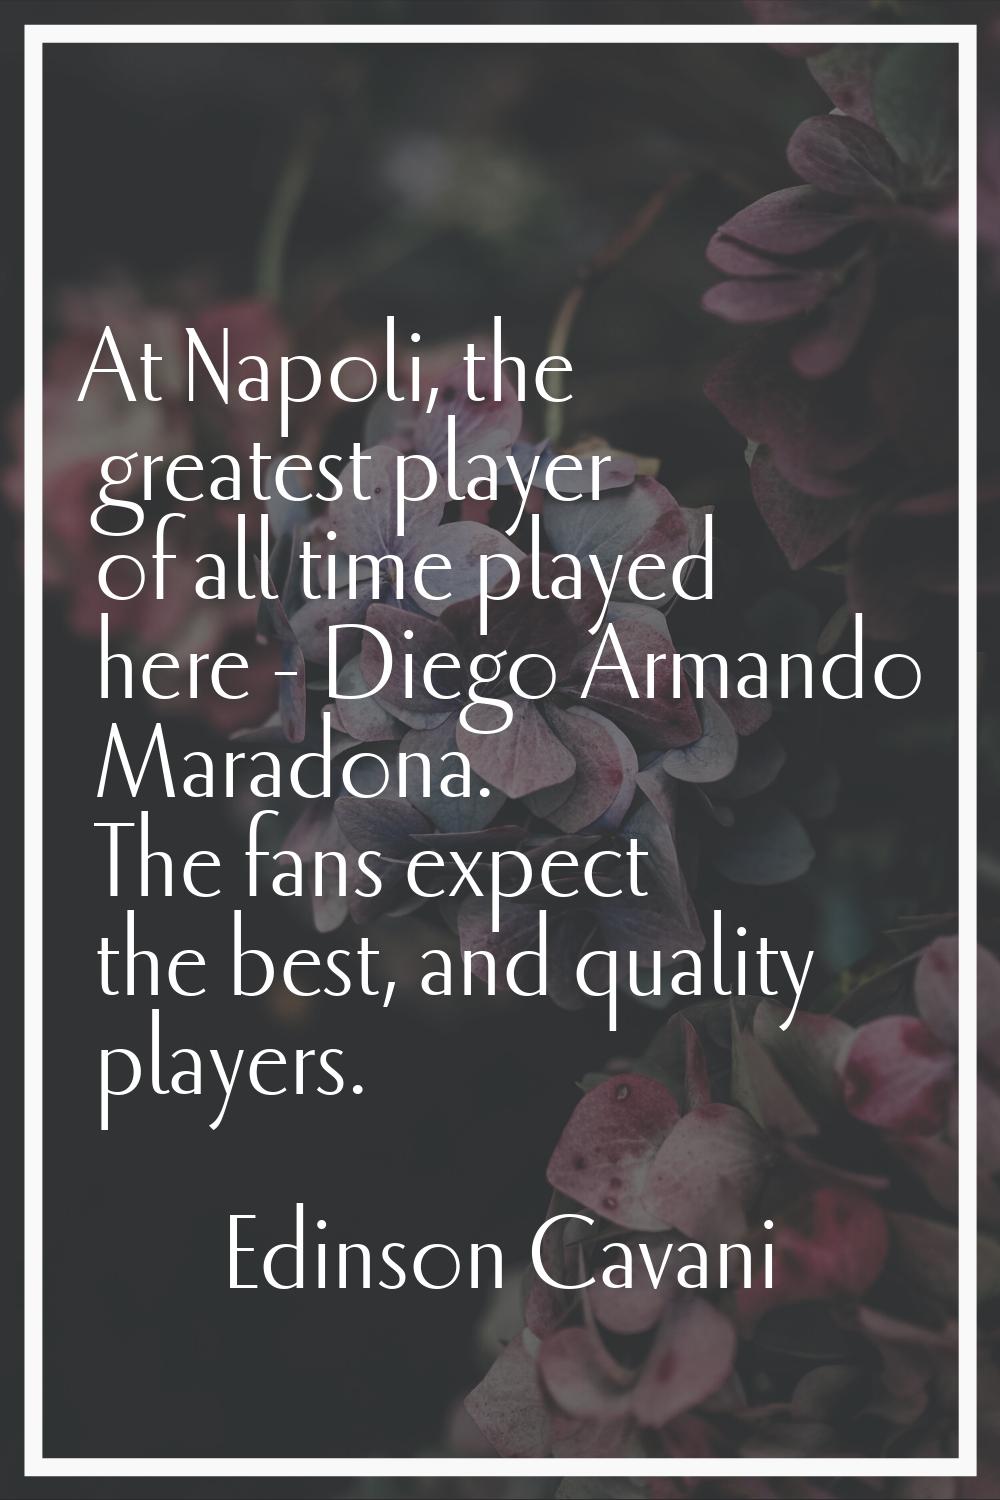 At Napoli, the greatest player of all time played here - Diego Armando Maradona. The fans expect th